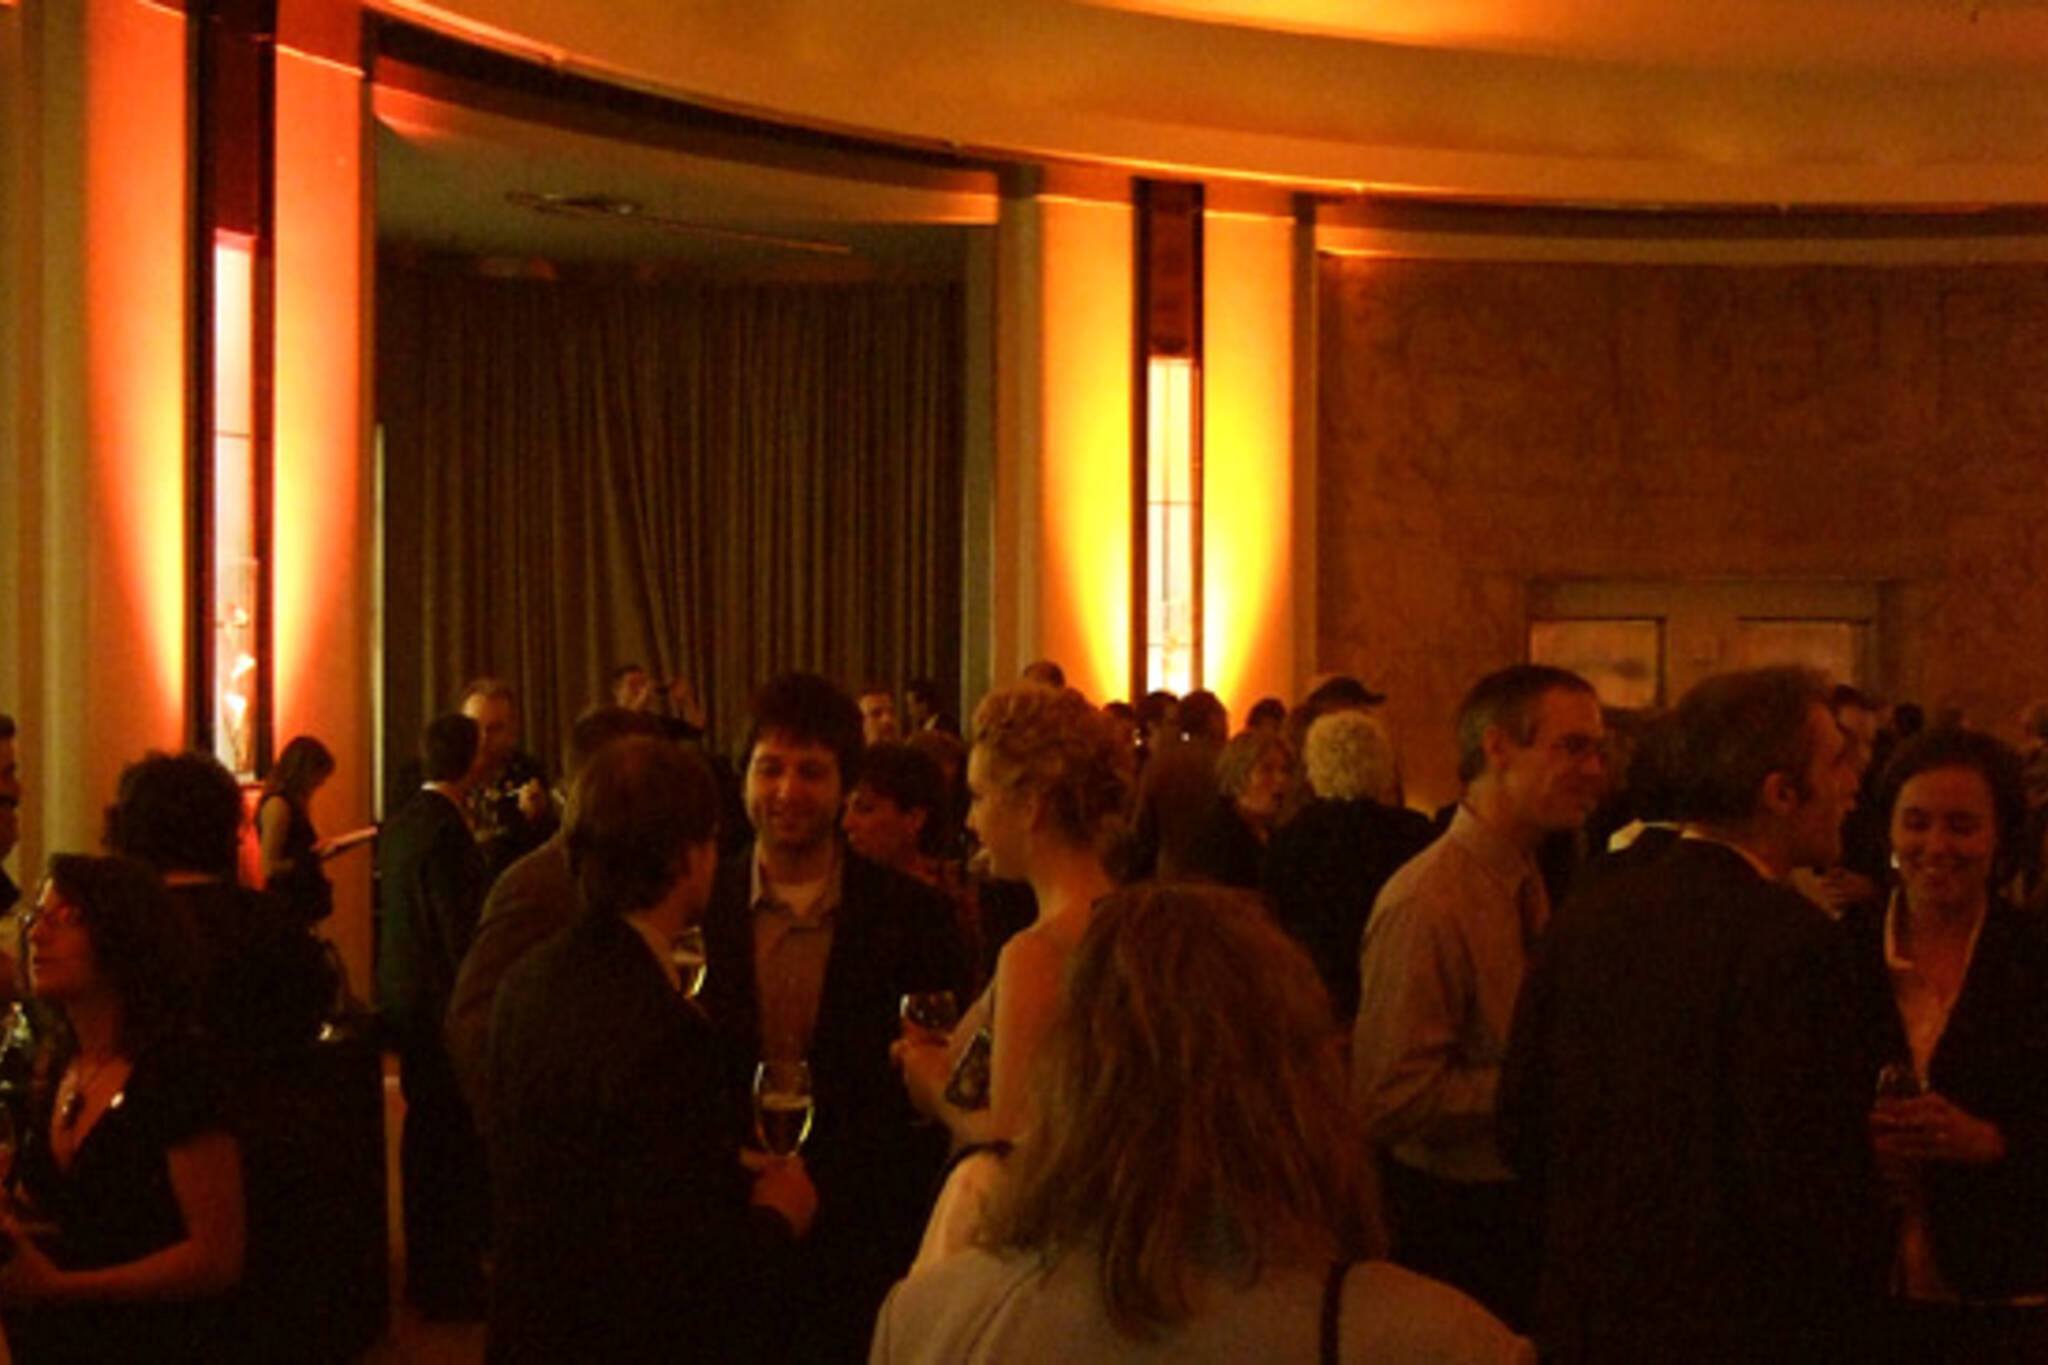 The Round Room @ The Carlu, home of the 7th Annual CNMAs